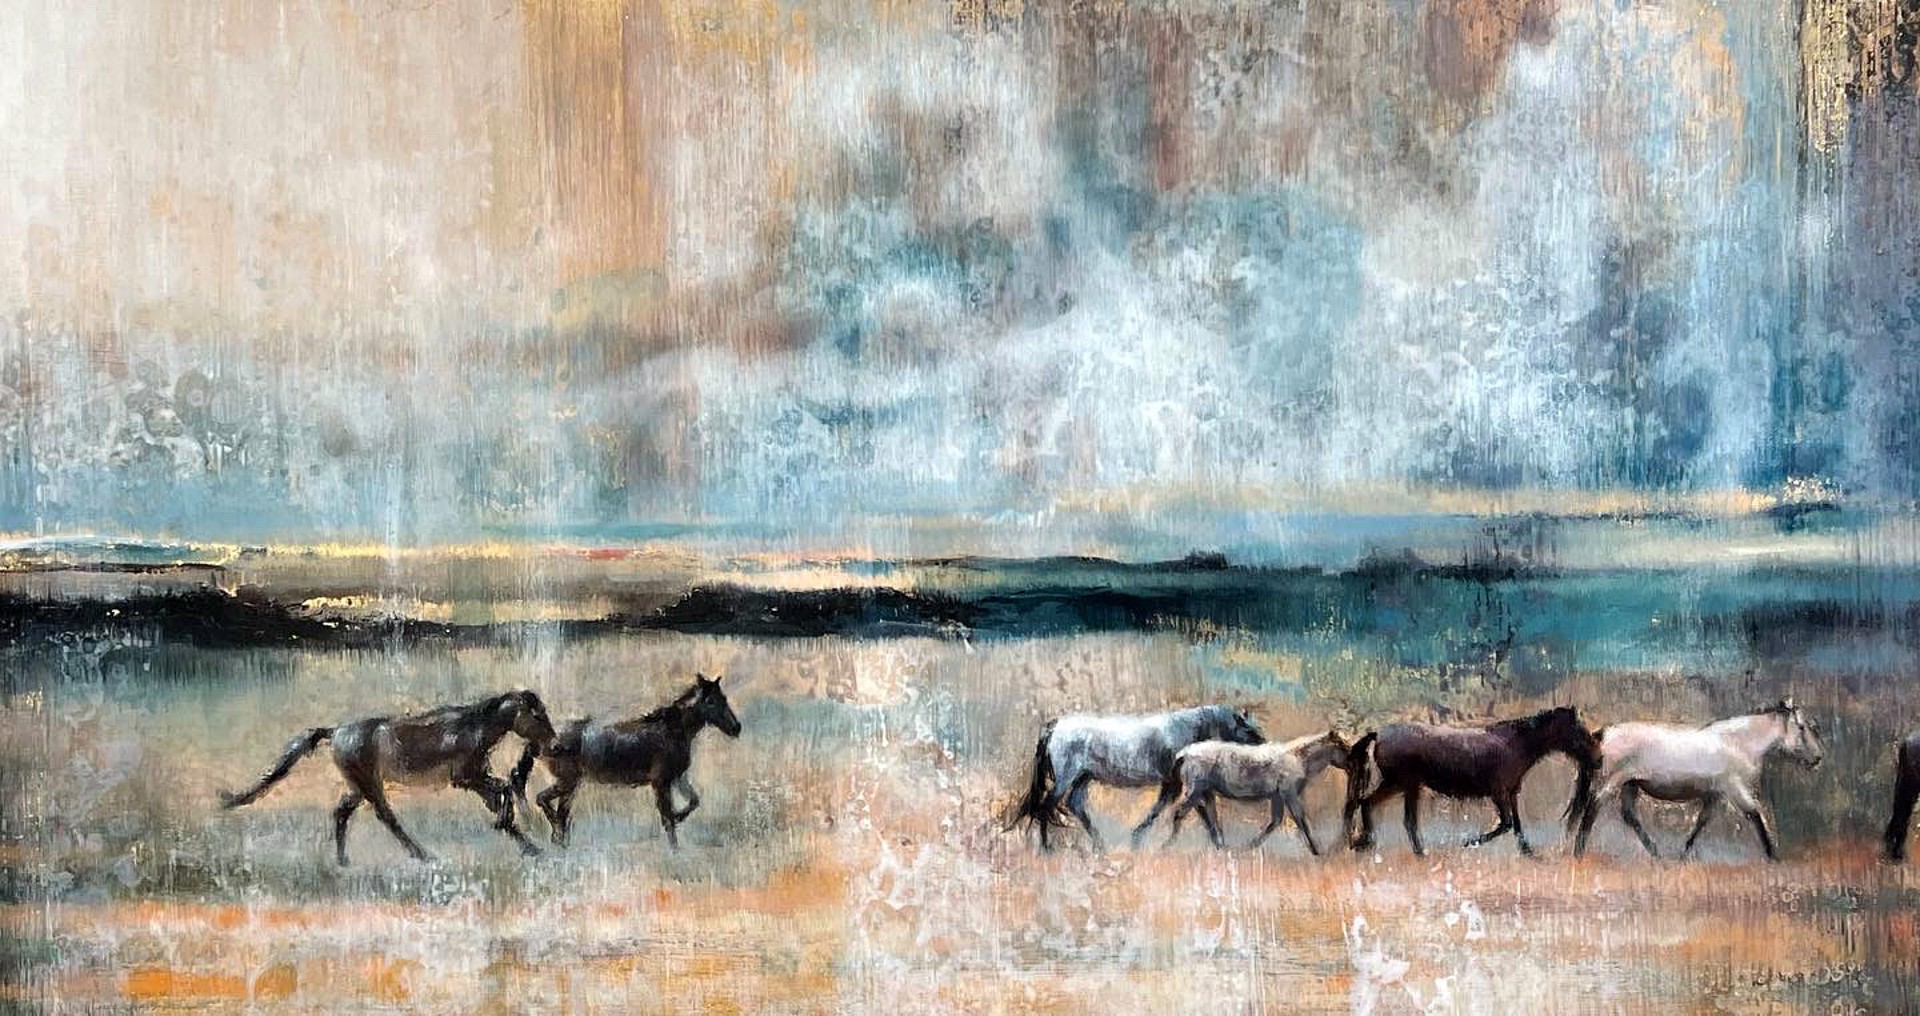 Original Acrylic Painting By Nealy Riley Featuring A Band Of Wild Horse Running Across Abstracted Landscape With Gold Leaf Details